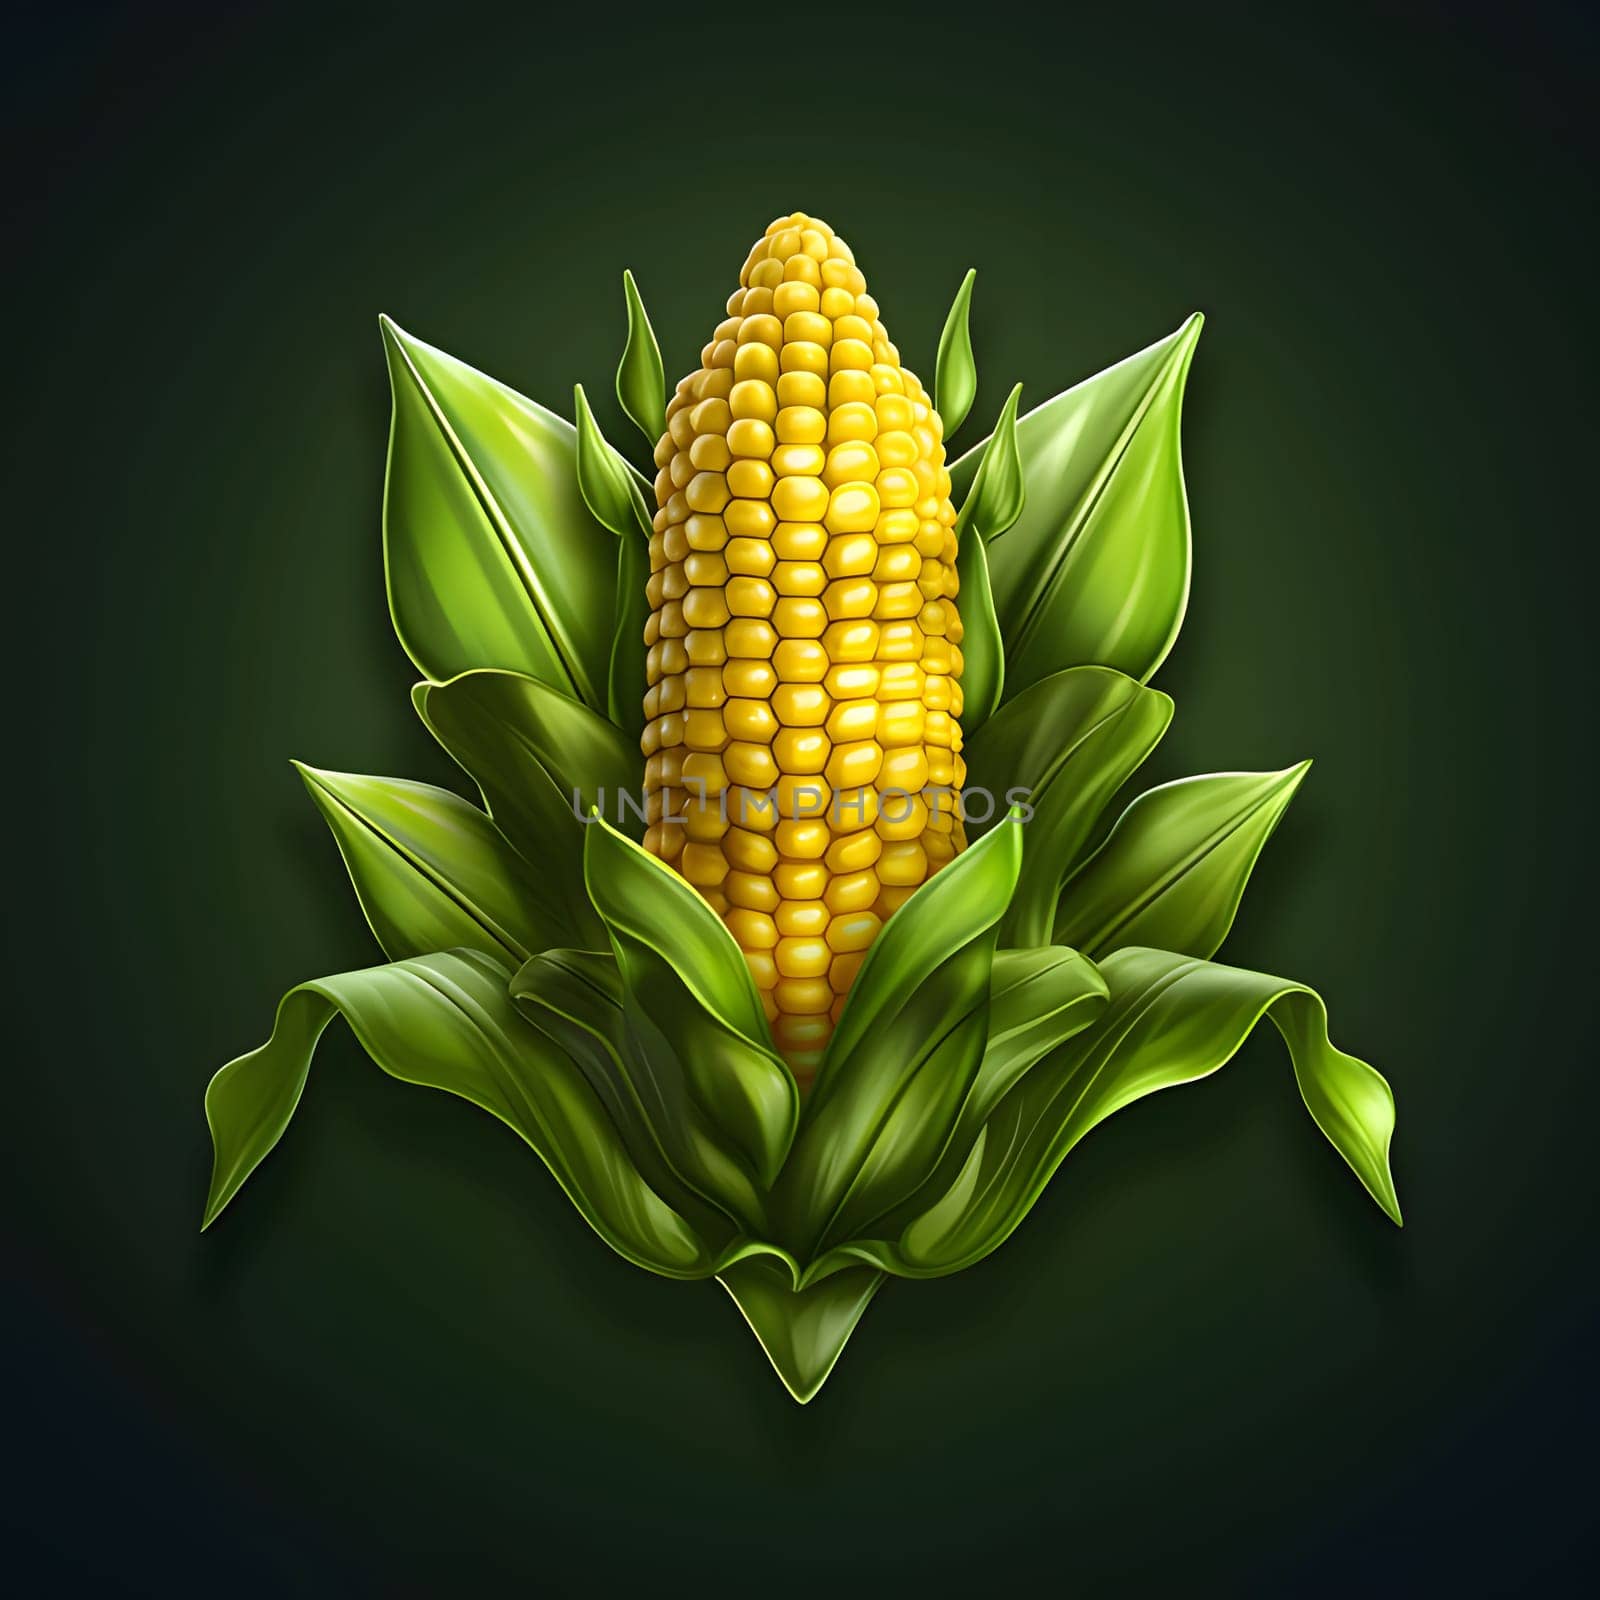 Cob of corn in green Leaf on a solid dark background. Corn as a dish of thanksgiving for the harvest. An atmosphere of joy and celebration.